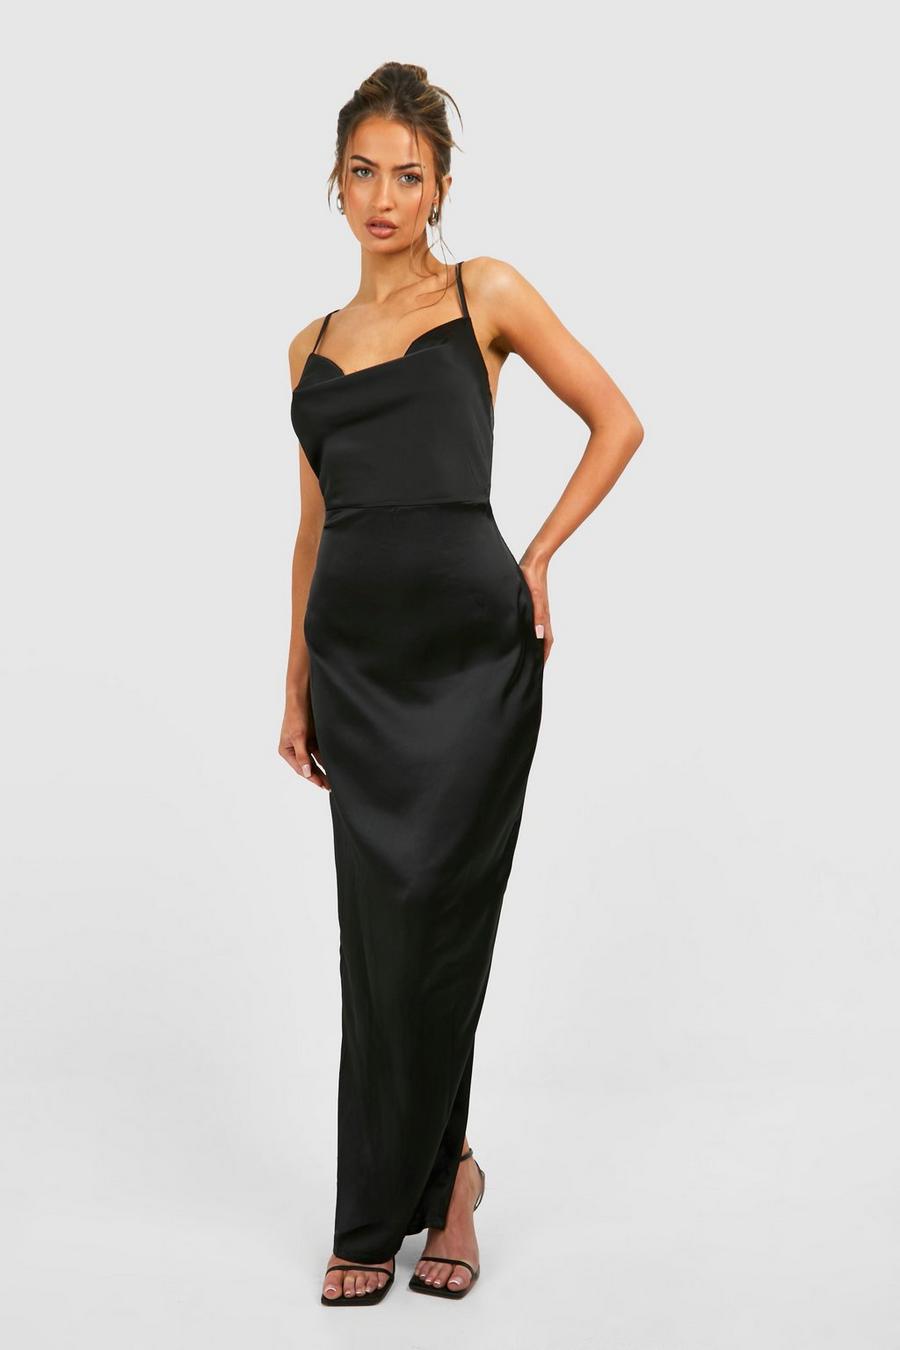 Black Strappy Luxe Satin Cowl Neck Maxi Dress image number 1